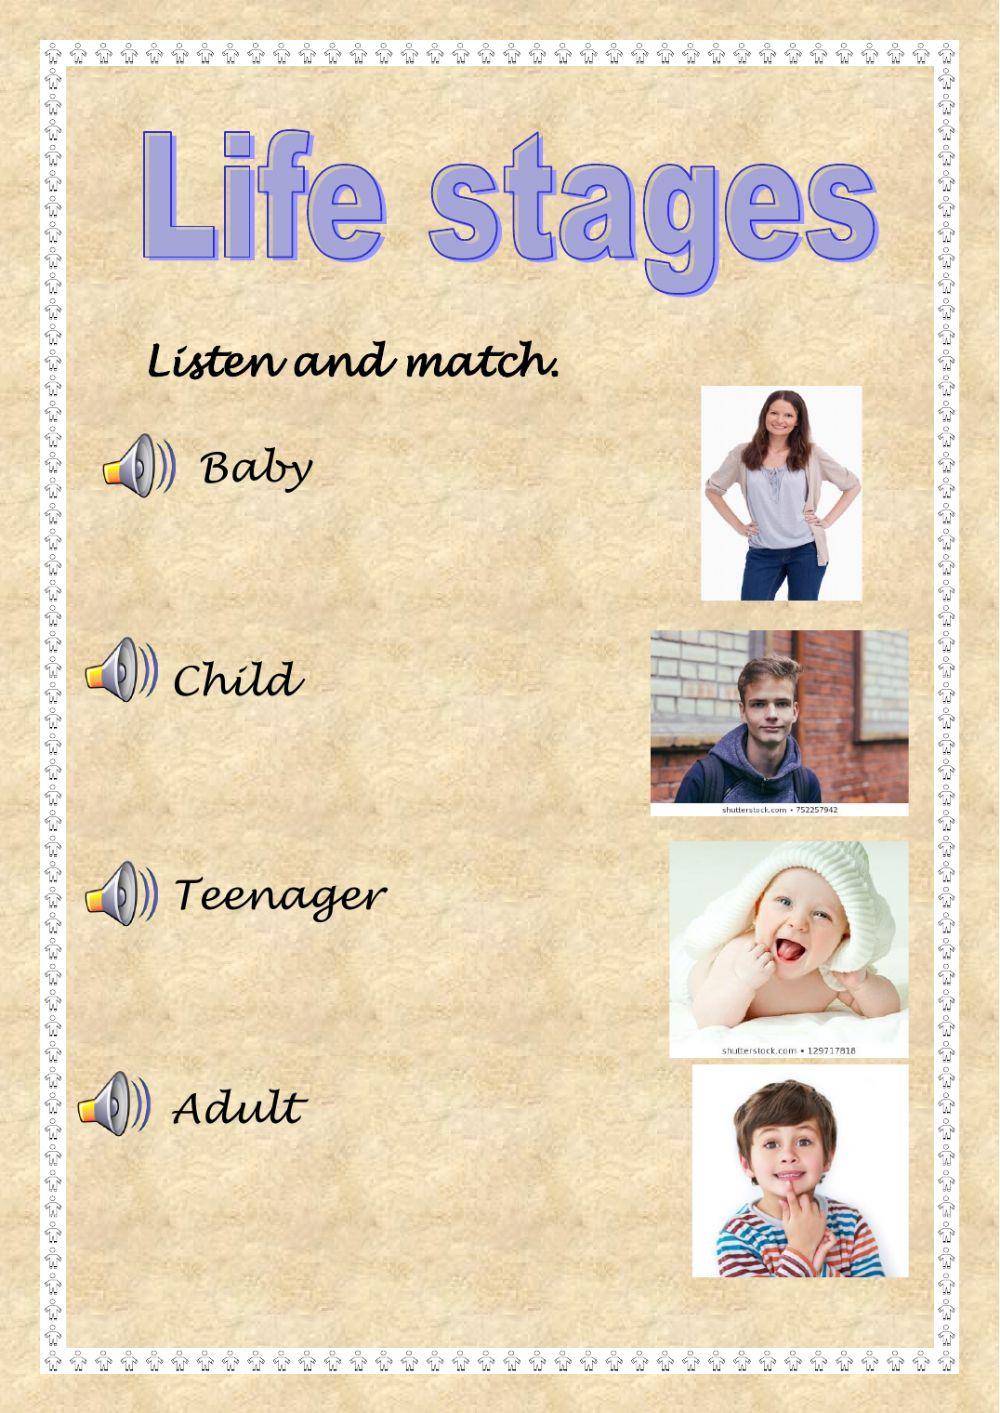 Life stages